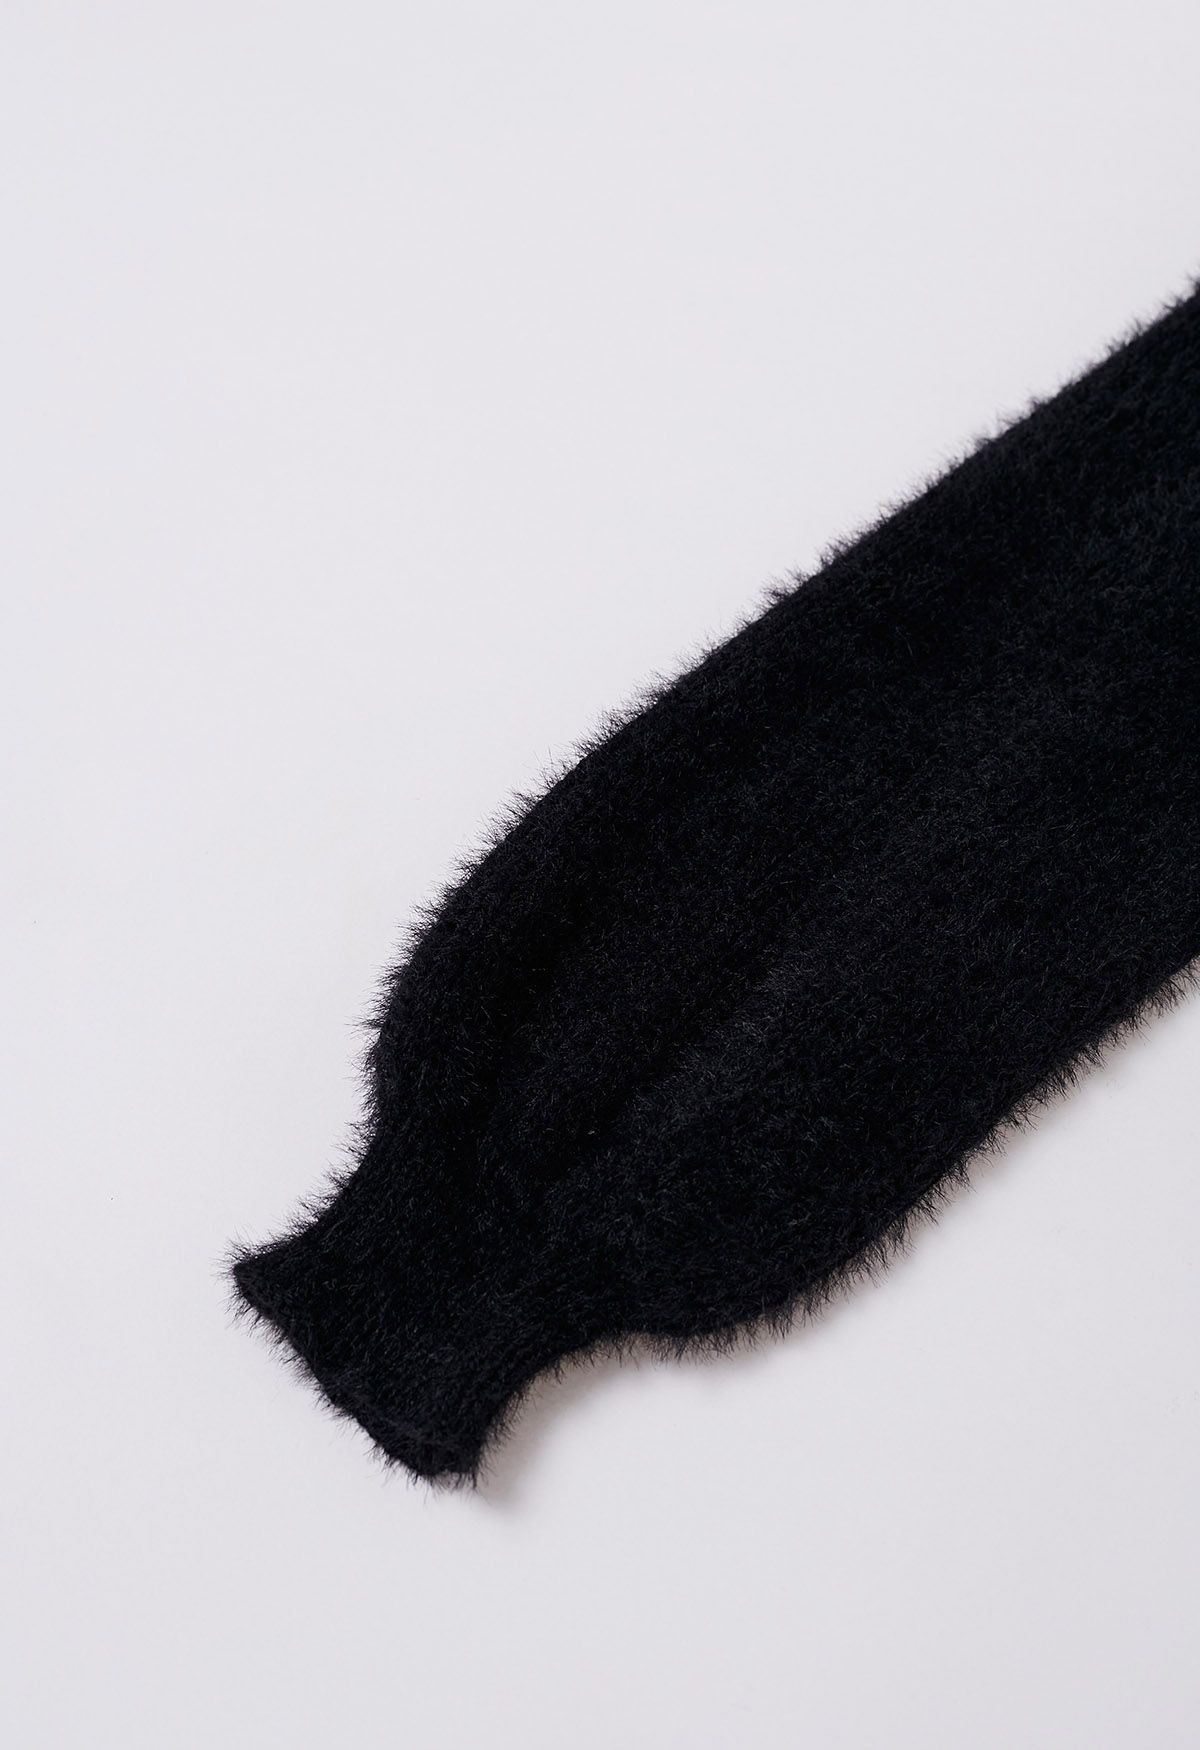 Bicolor Fuzzy Knit Button Up Cardigan in Black